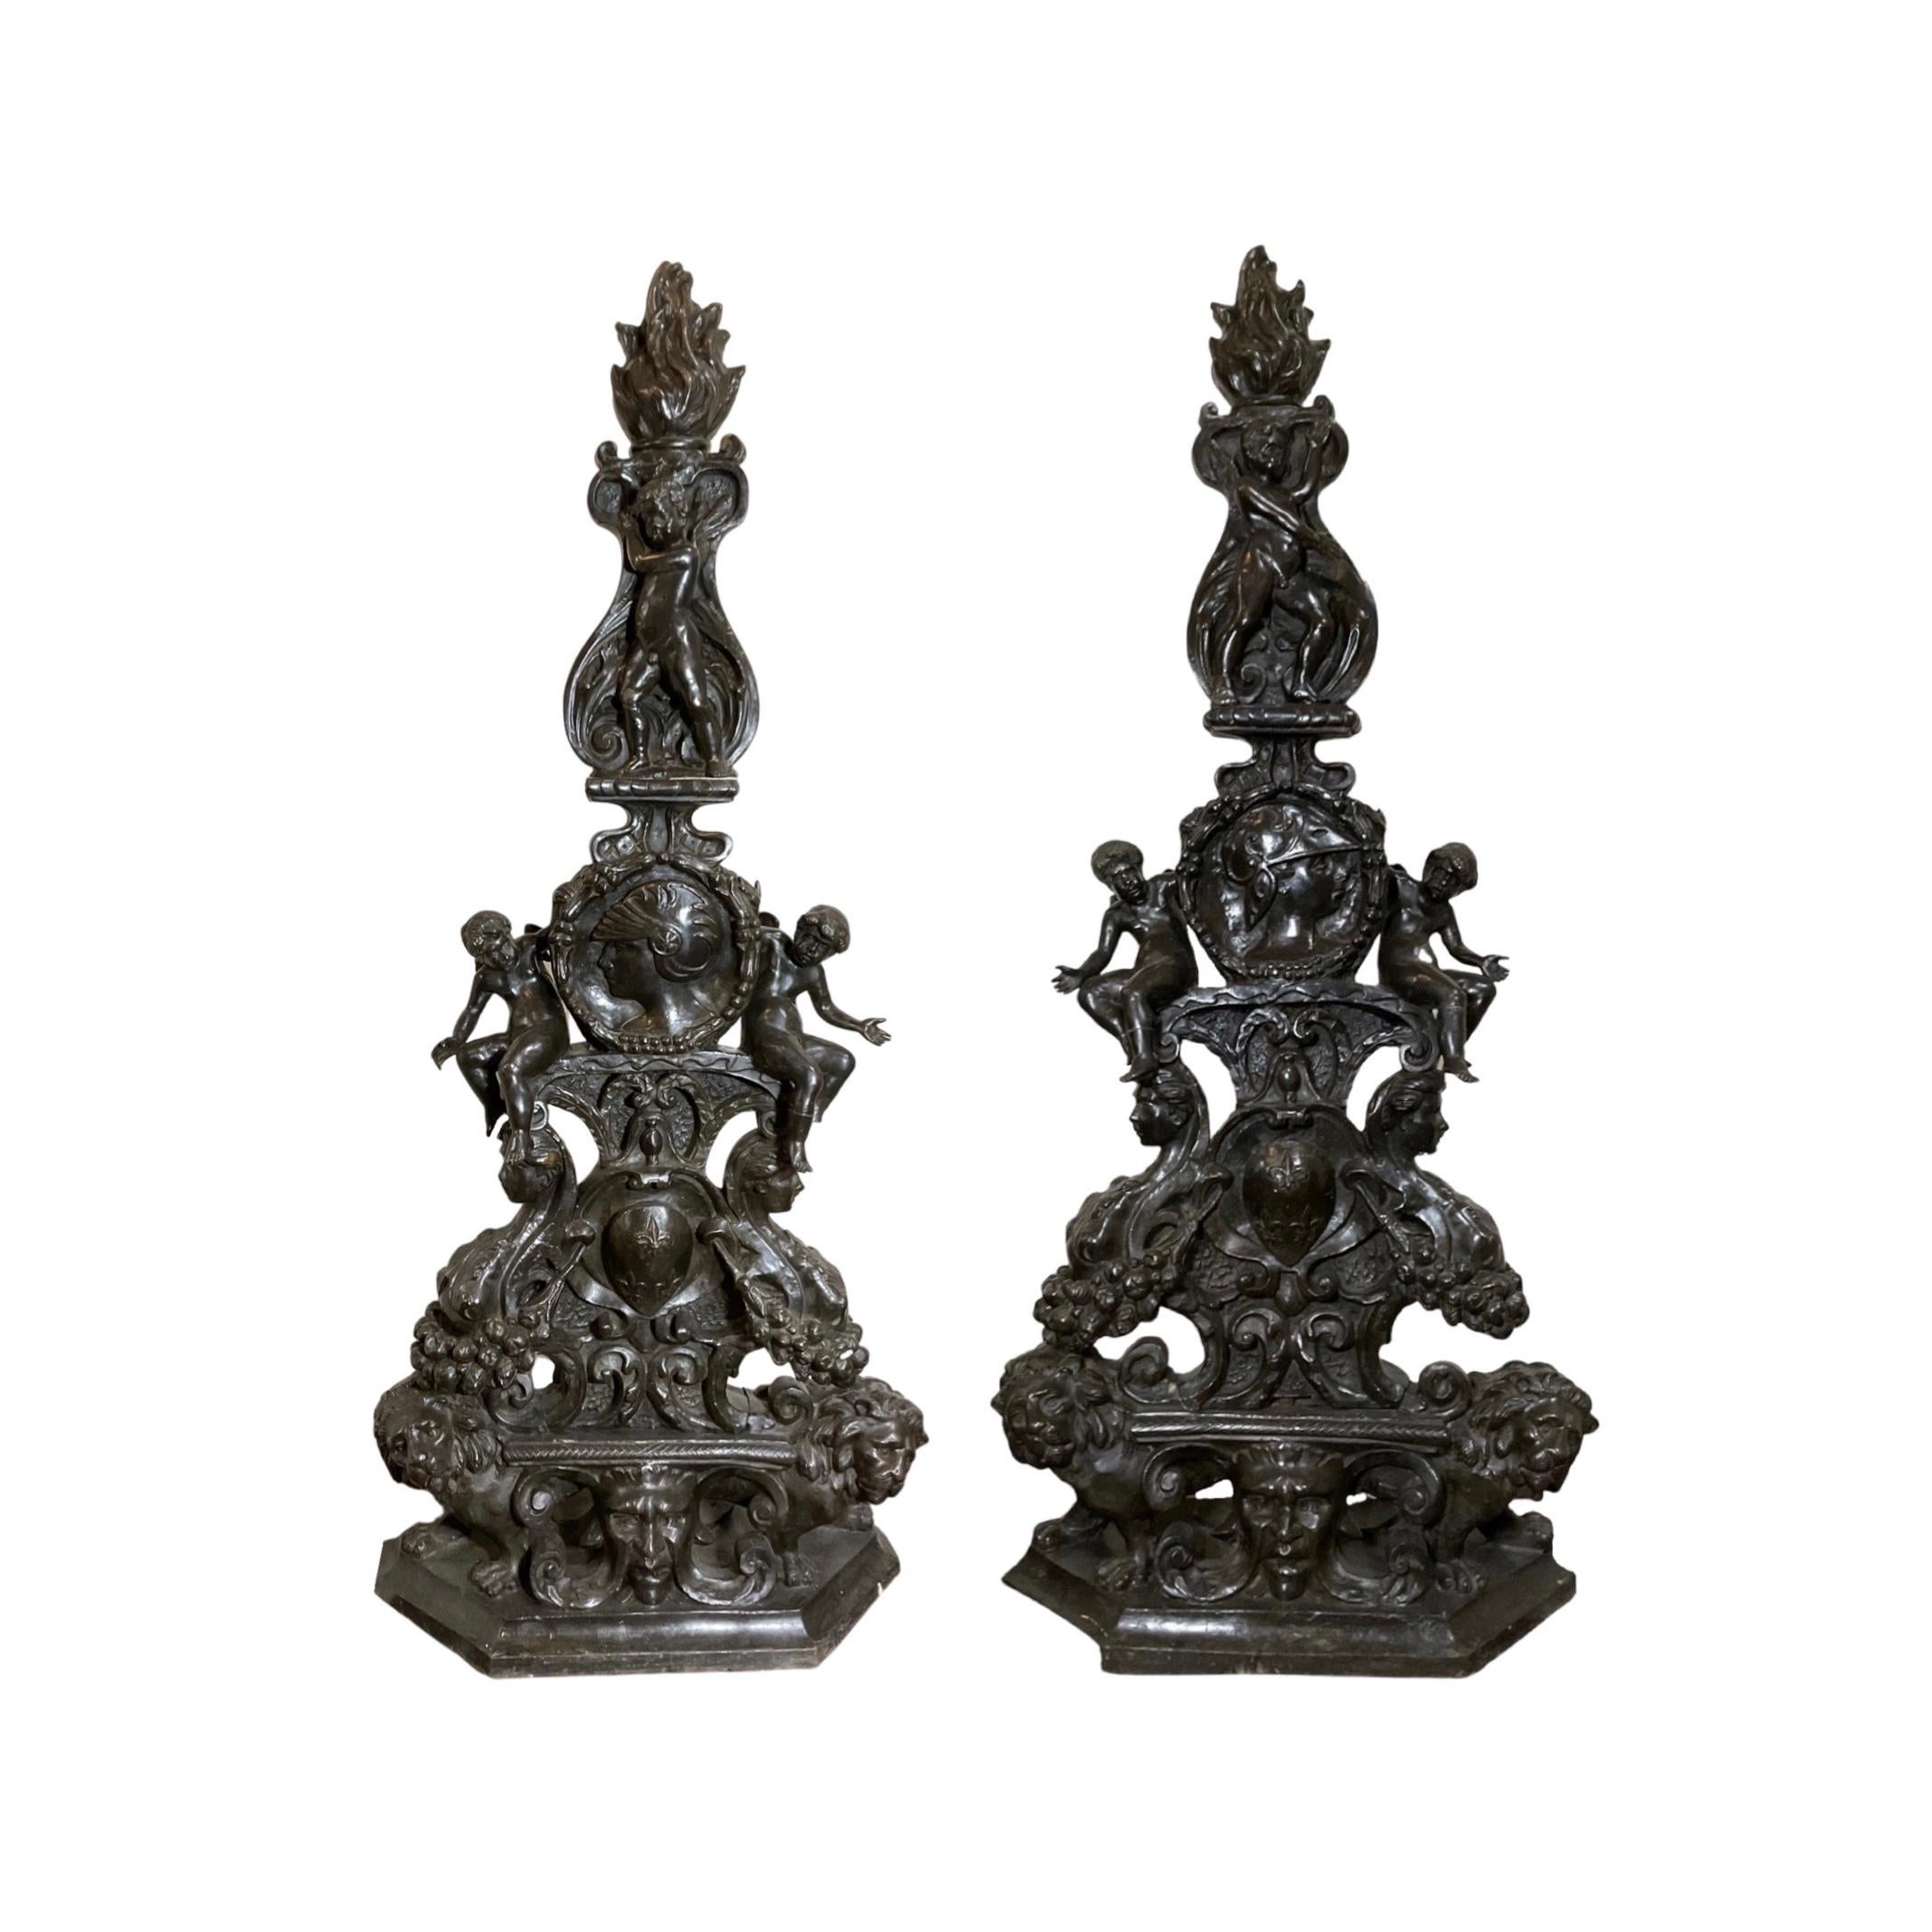 These meticulously-crafted French Bronze andiron chenets are circa 1790 and feature cherub angels carved along the andirons as well as face depictions. Built in France of bronze, this pair of andiron chenets is perfect for adding an antique elegance